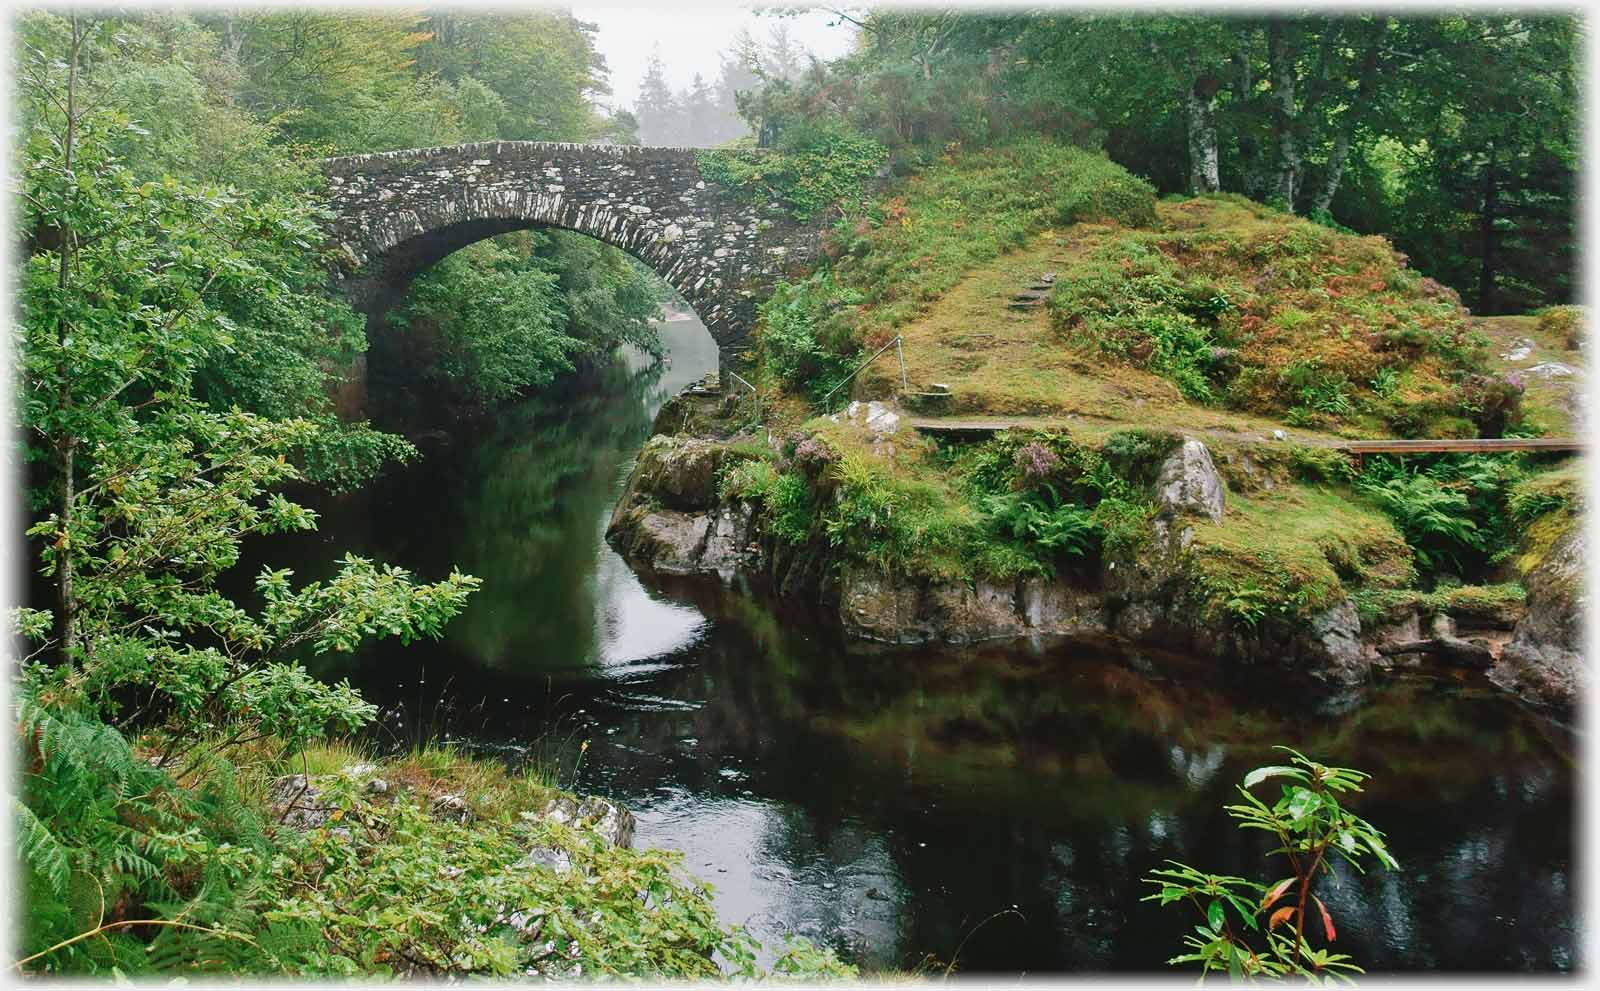 Arched bridge in thick woods.